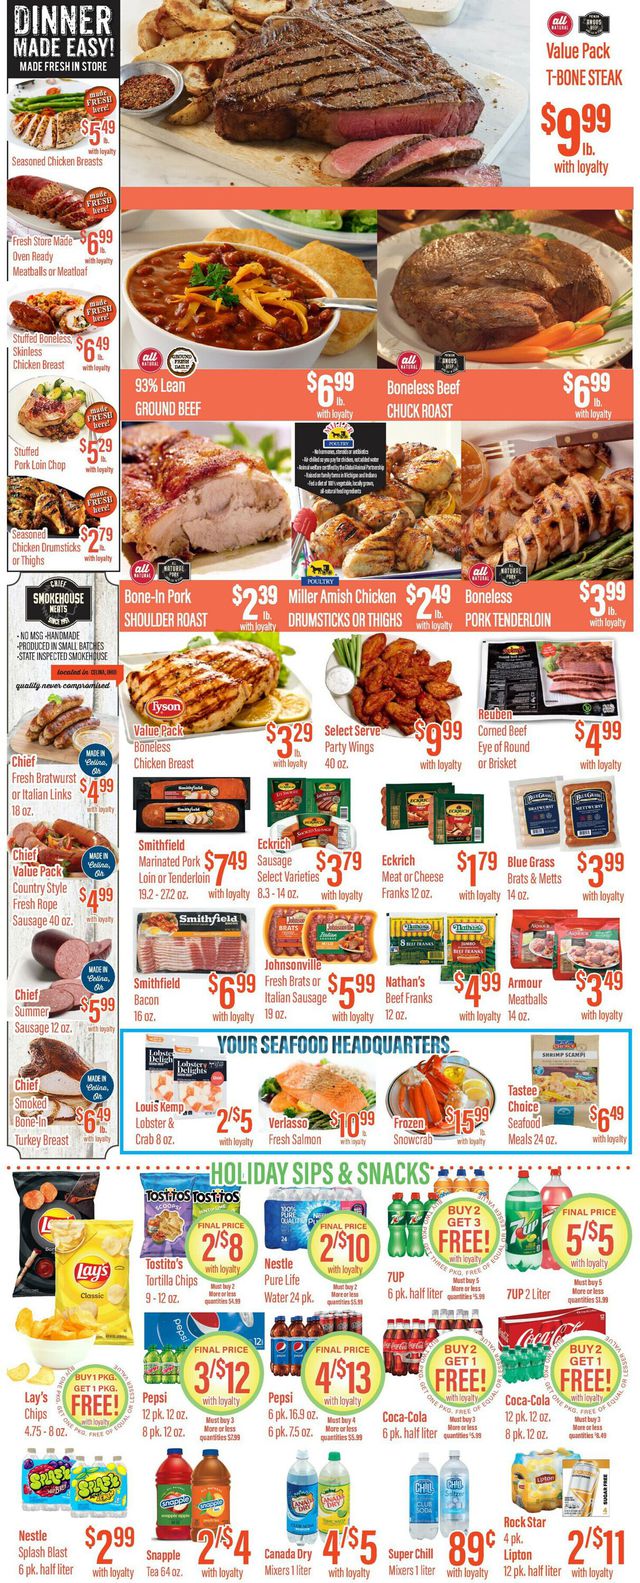 Remke Markets Ad from 12/26/2022